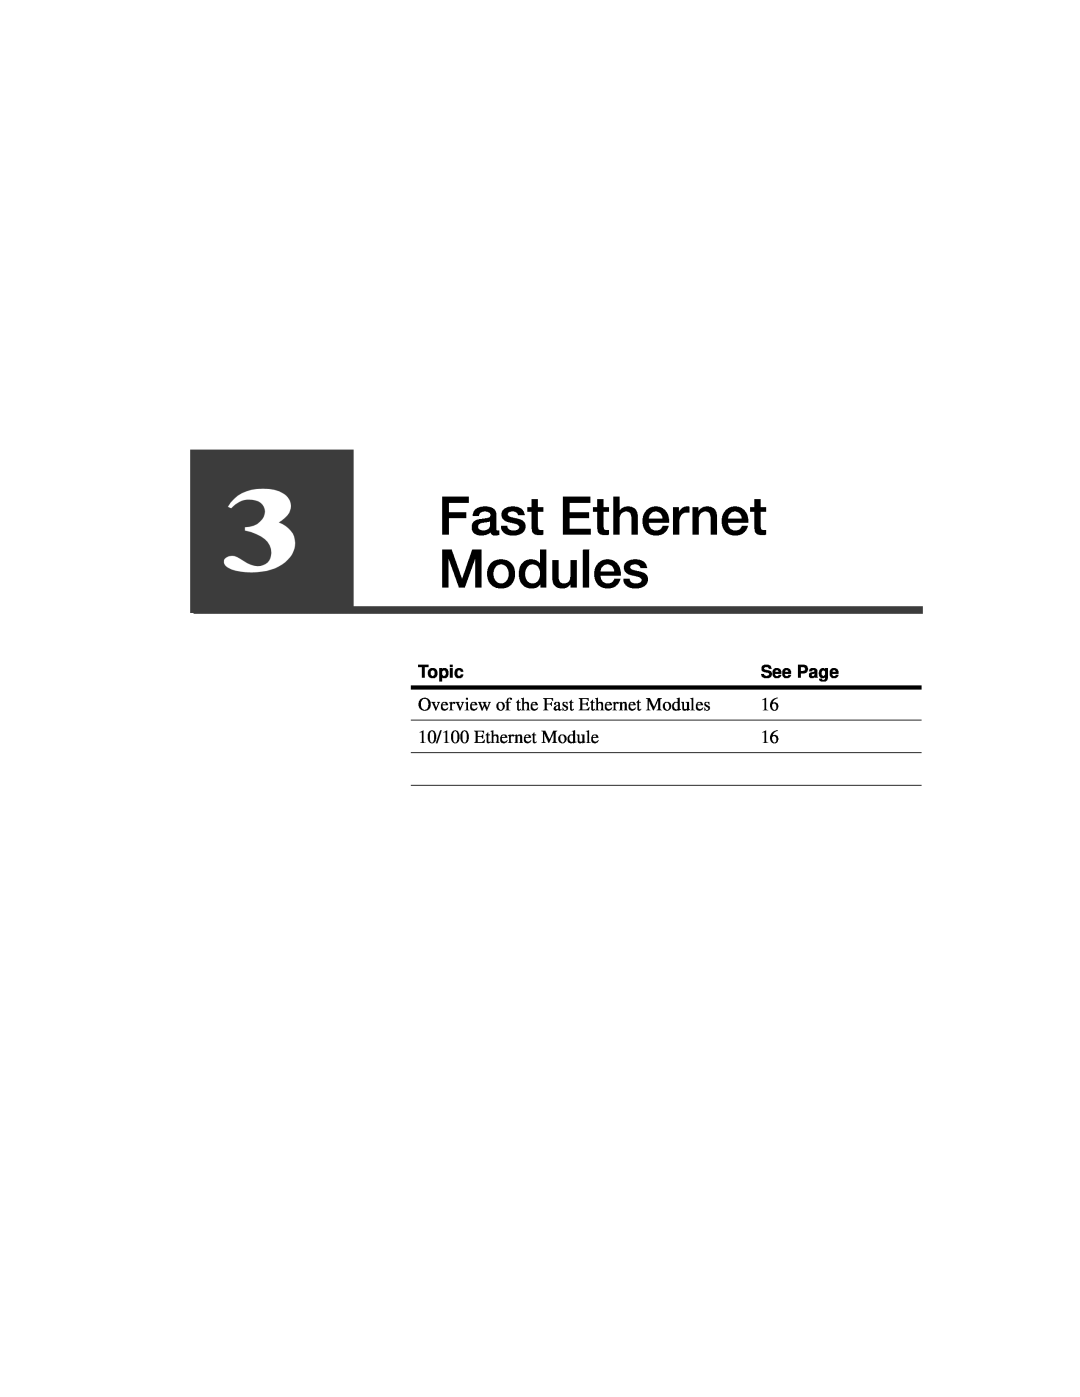 Intel A21721-001 manual Overview of the Fast Ethernet Modules, 10/100 Ethernet Module, Topic, See Page 